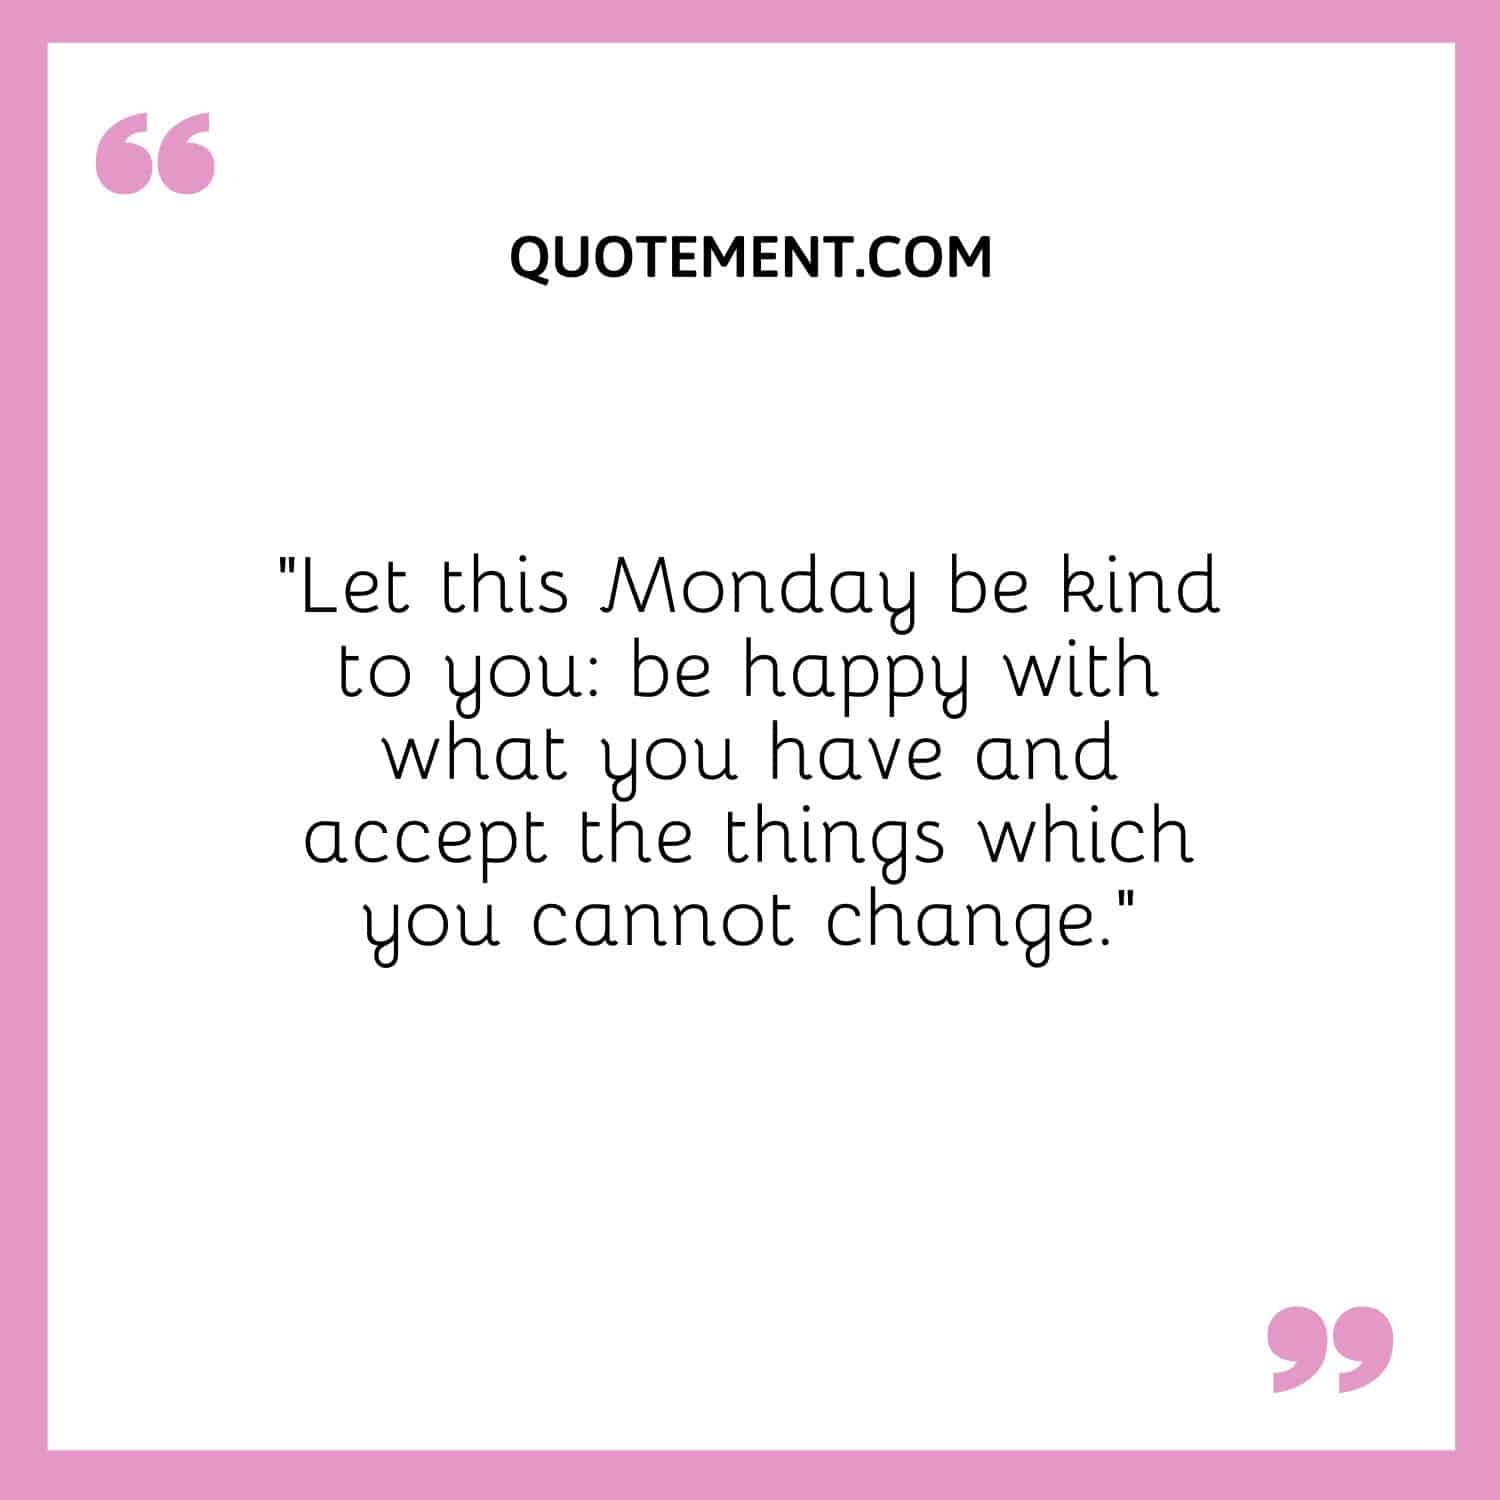 Let this Monday be kind to you be happy with what you have